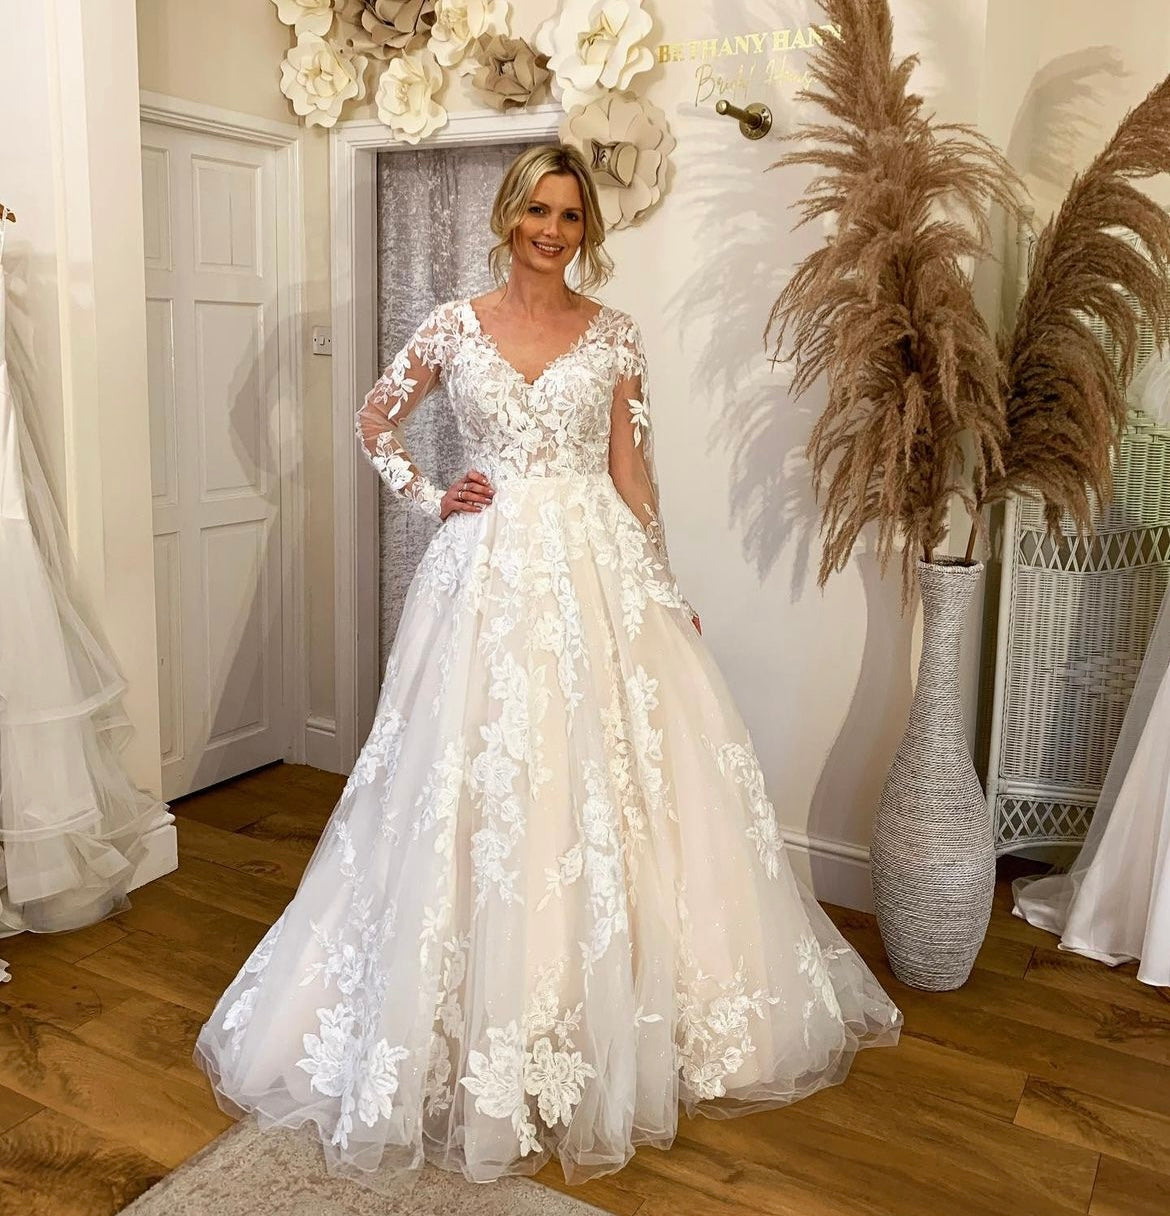 20 of the Prettiest Wedding Dresses with Buttons